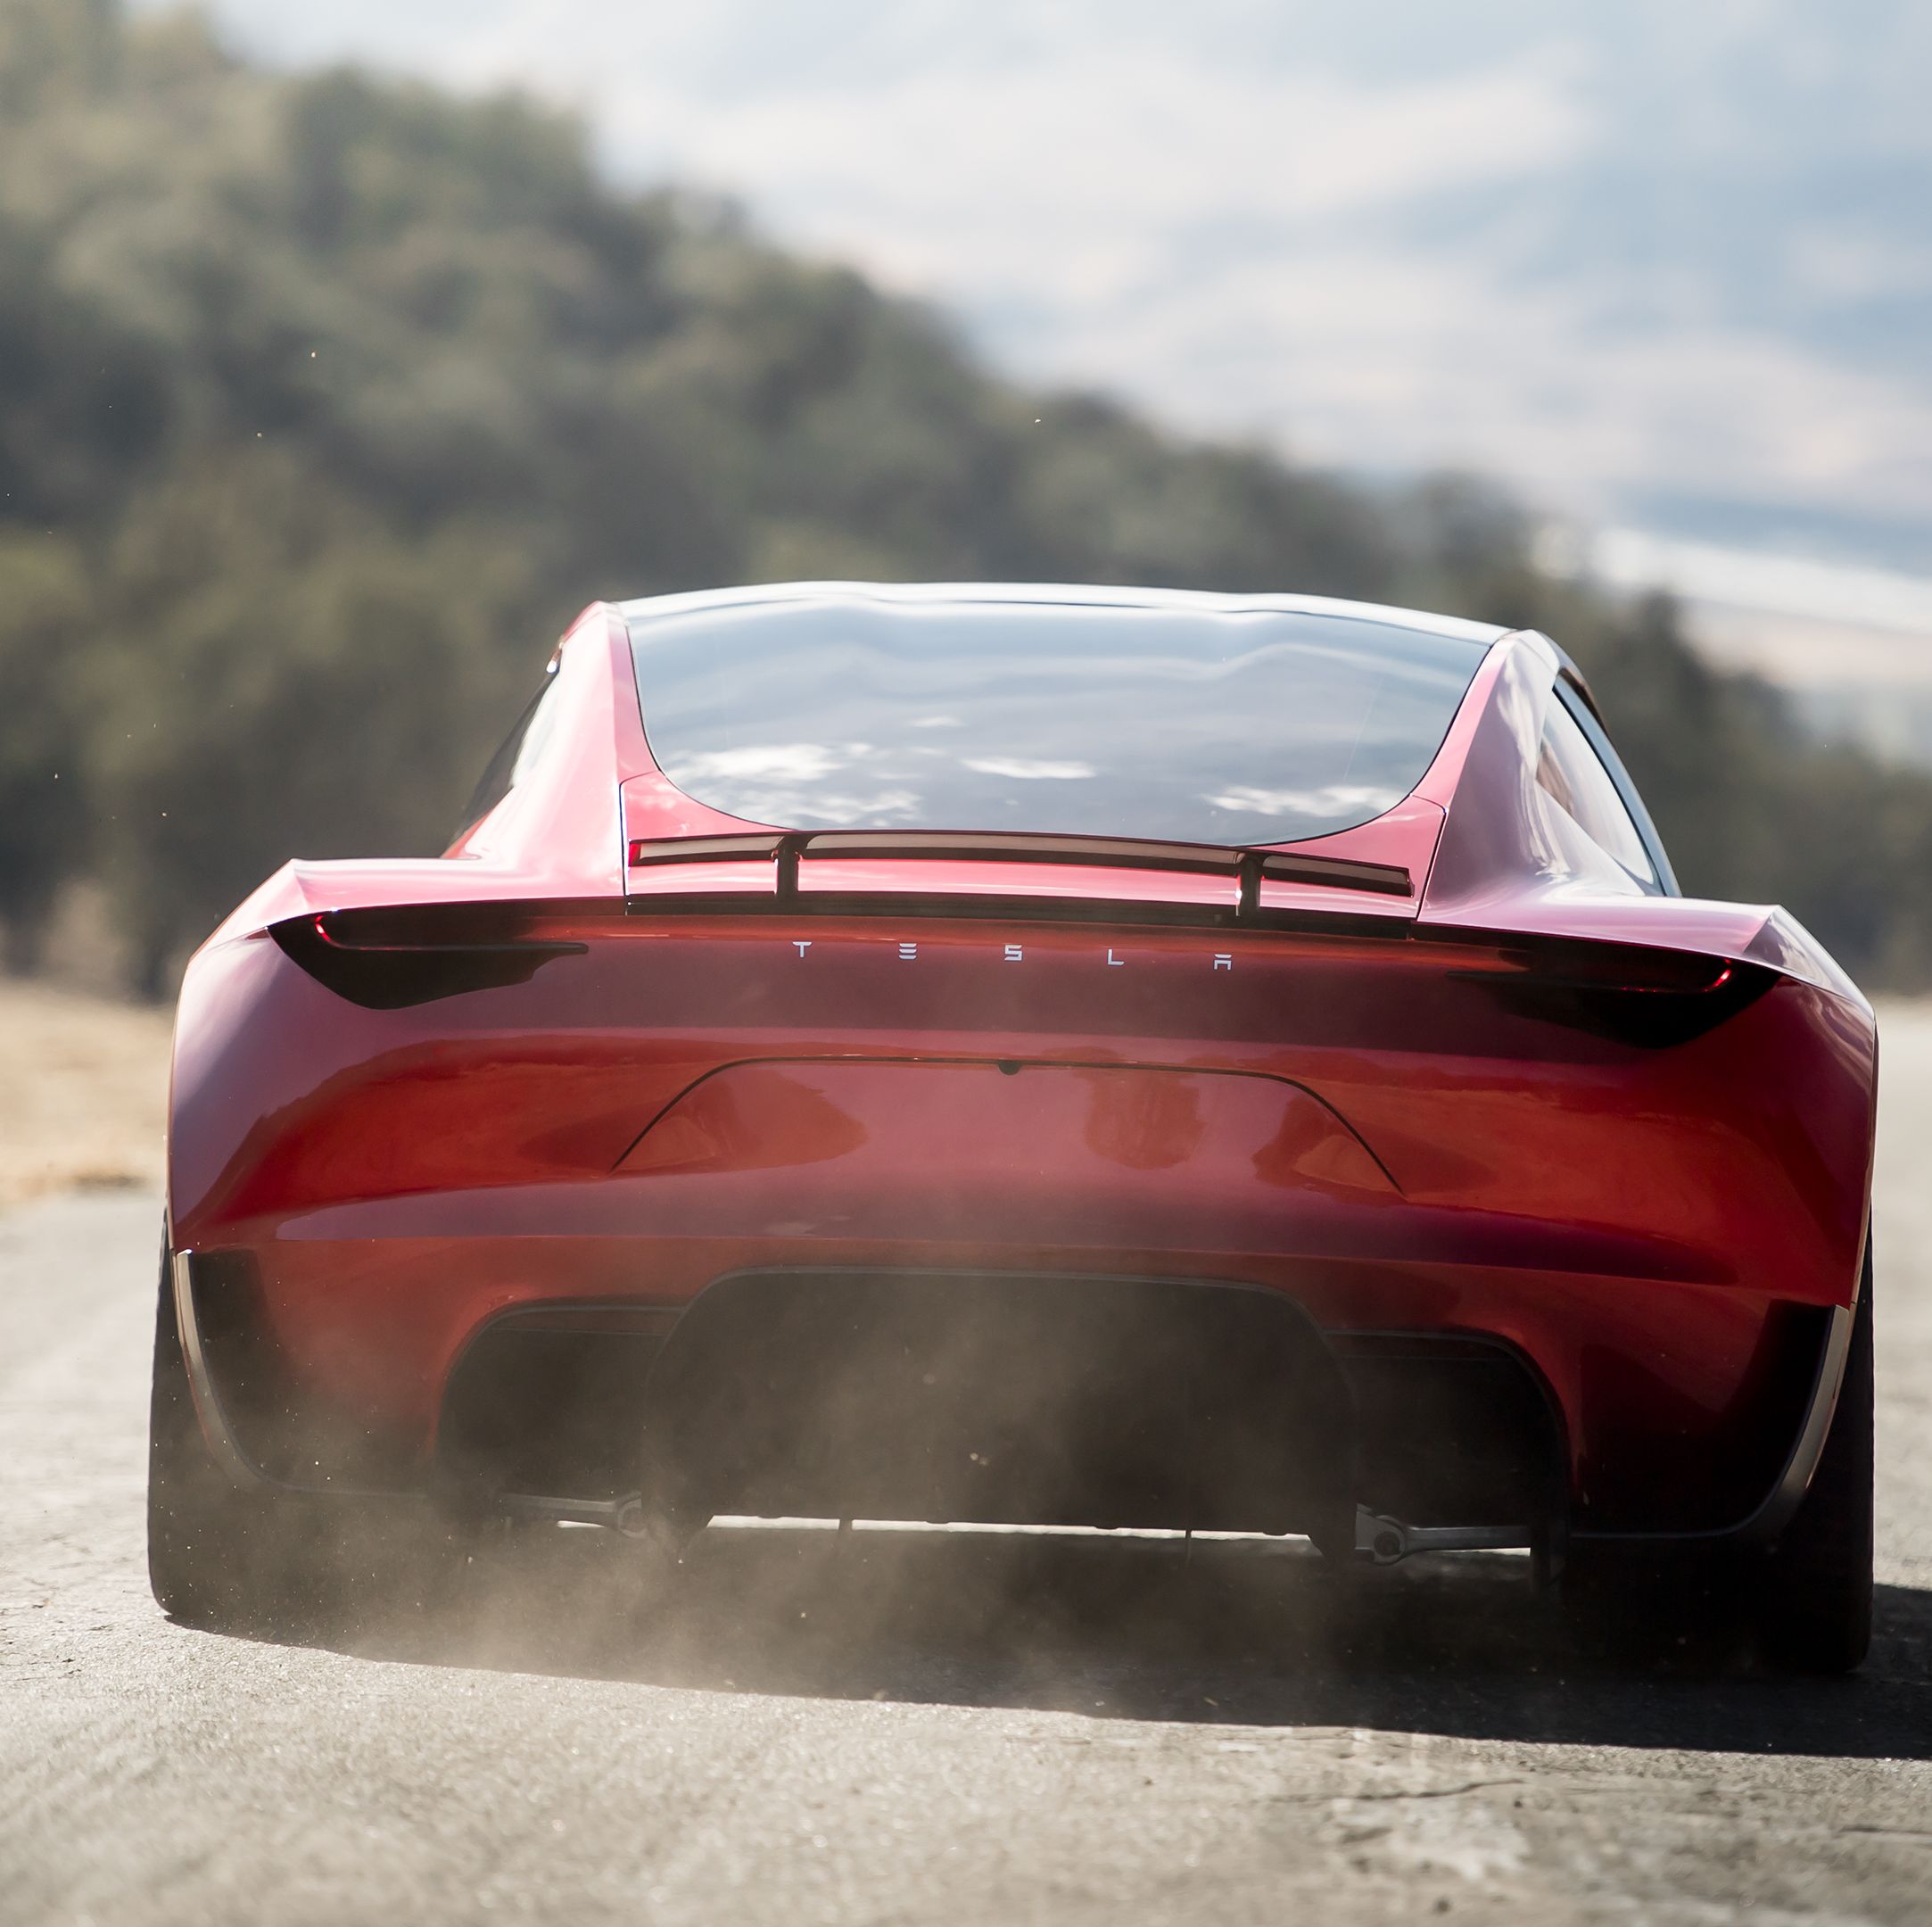 Why You Should Be Skeptical of Elon's Claim About a Sub-Second Tesla Roadster 0-60 Time